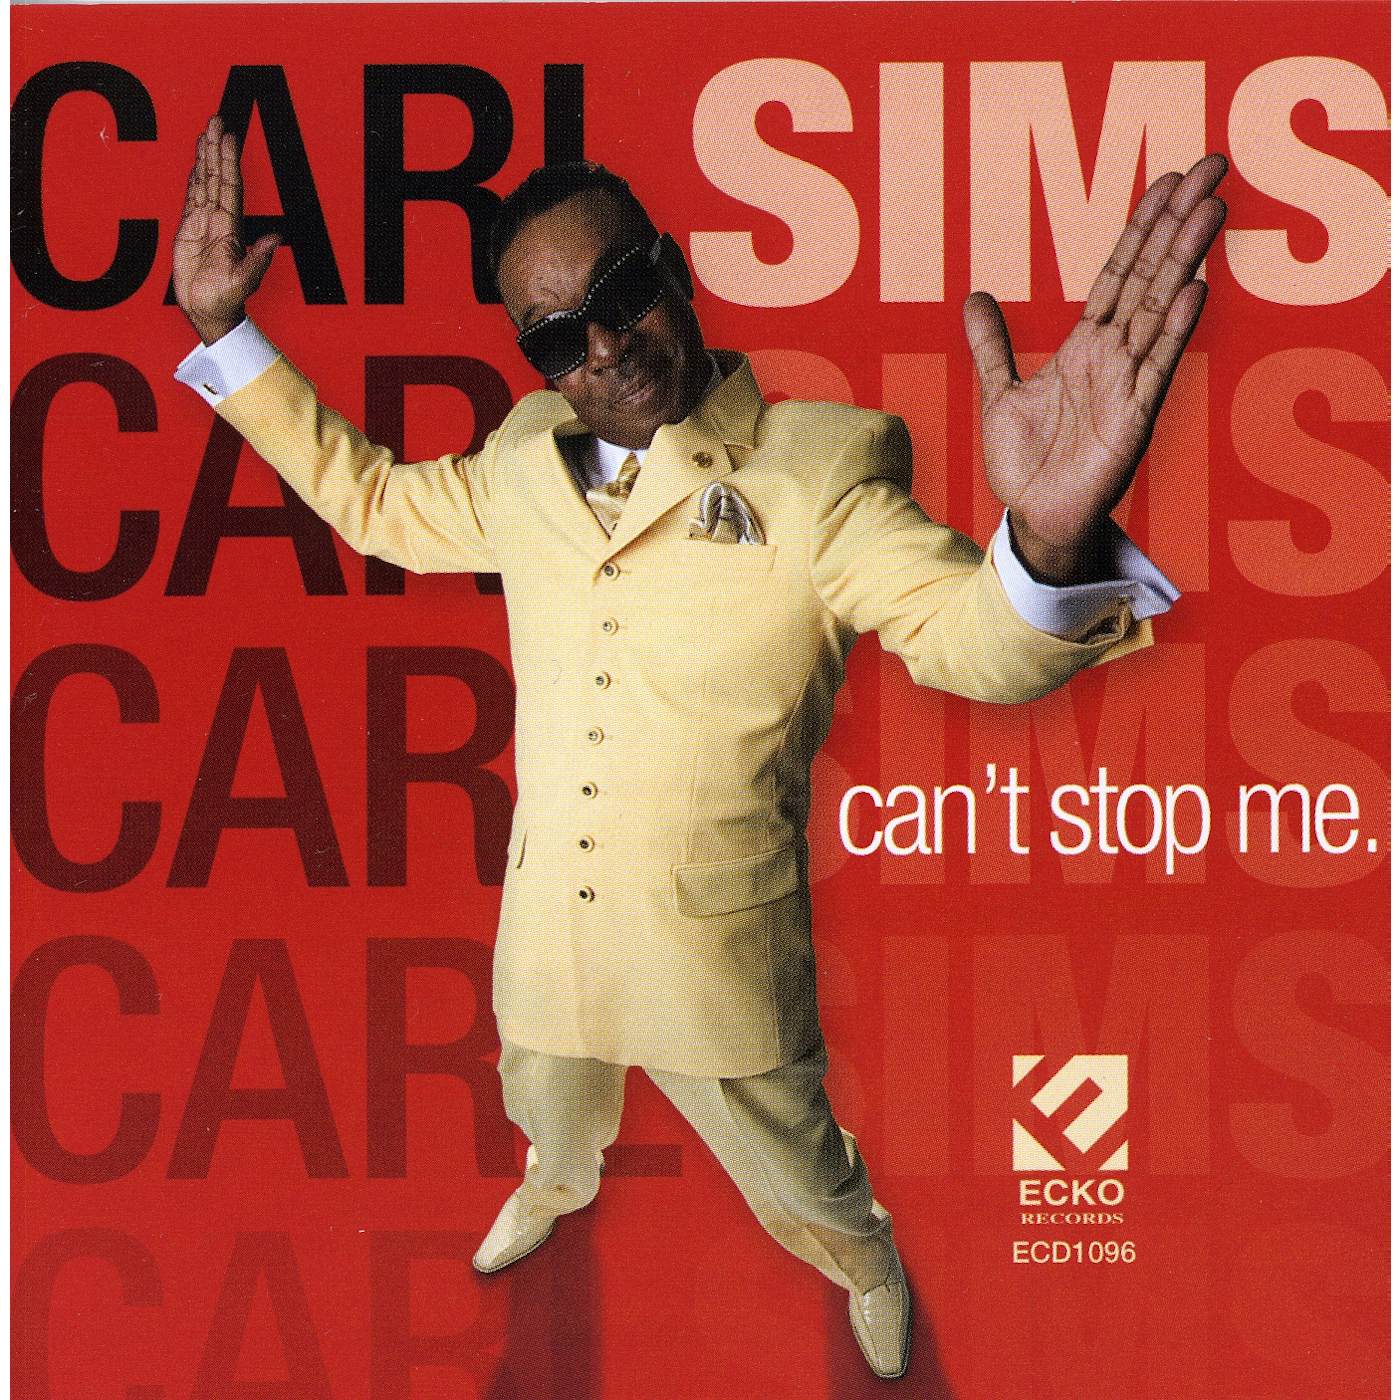 Carl Sims CAN'T STOP ME CD